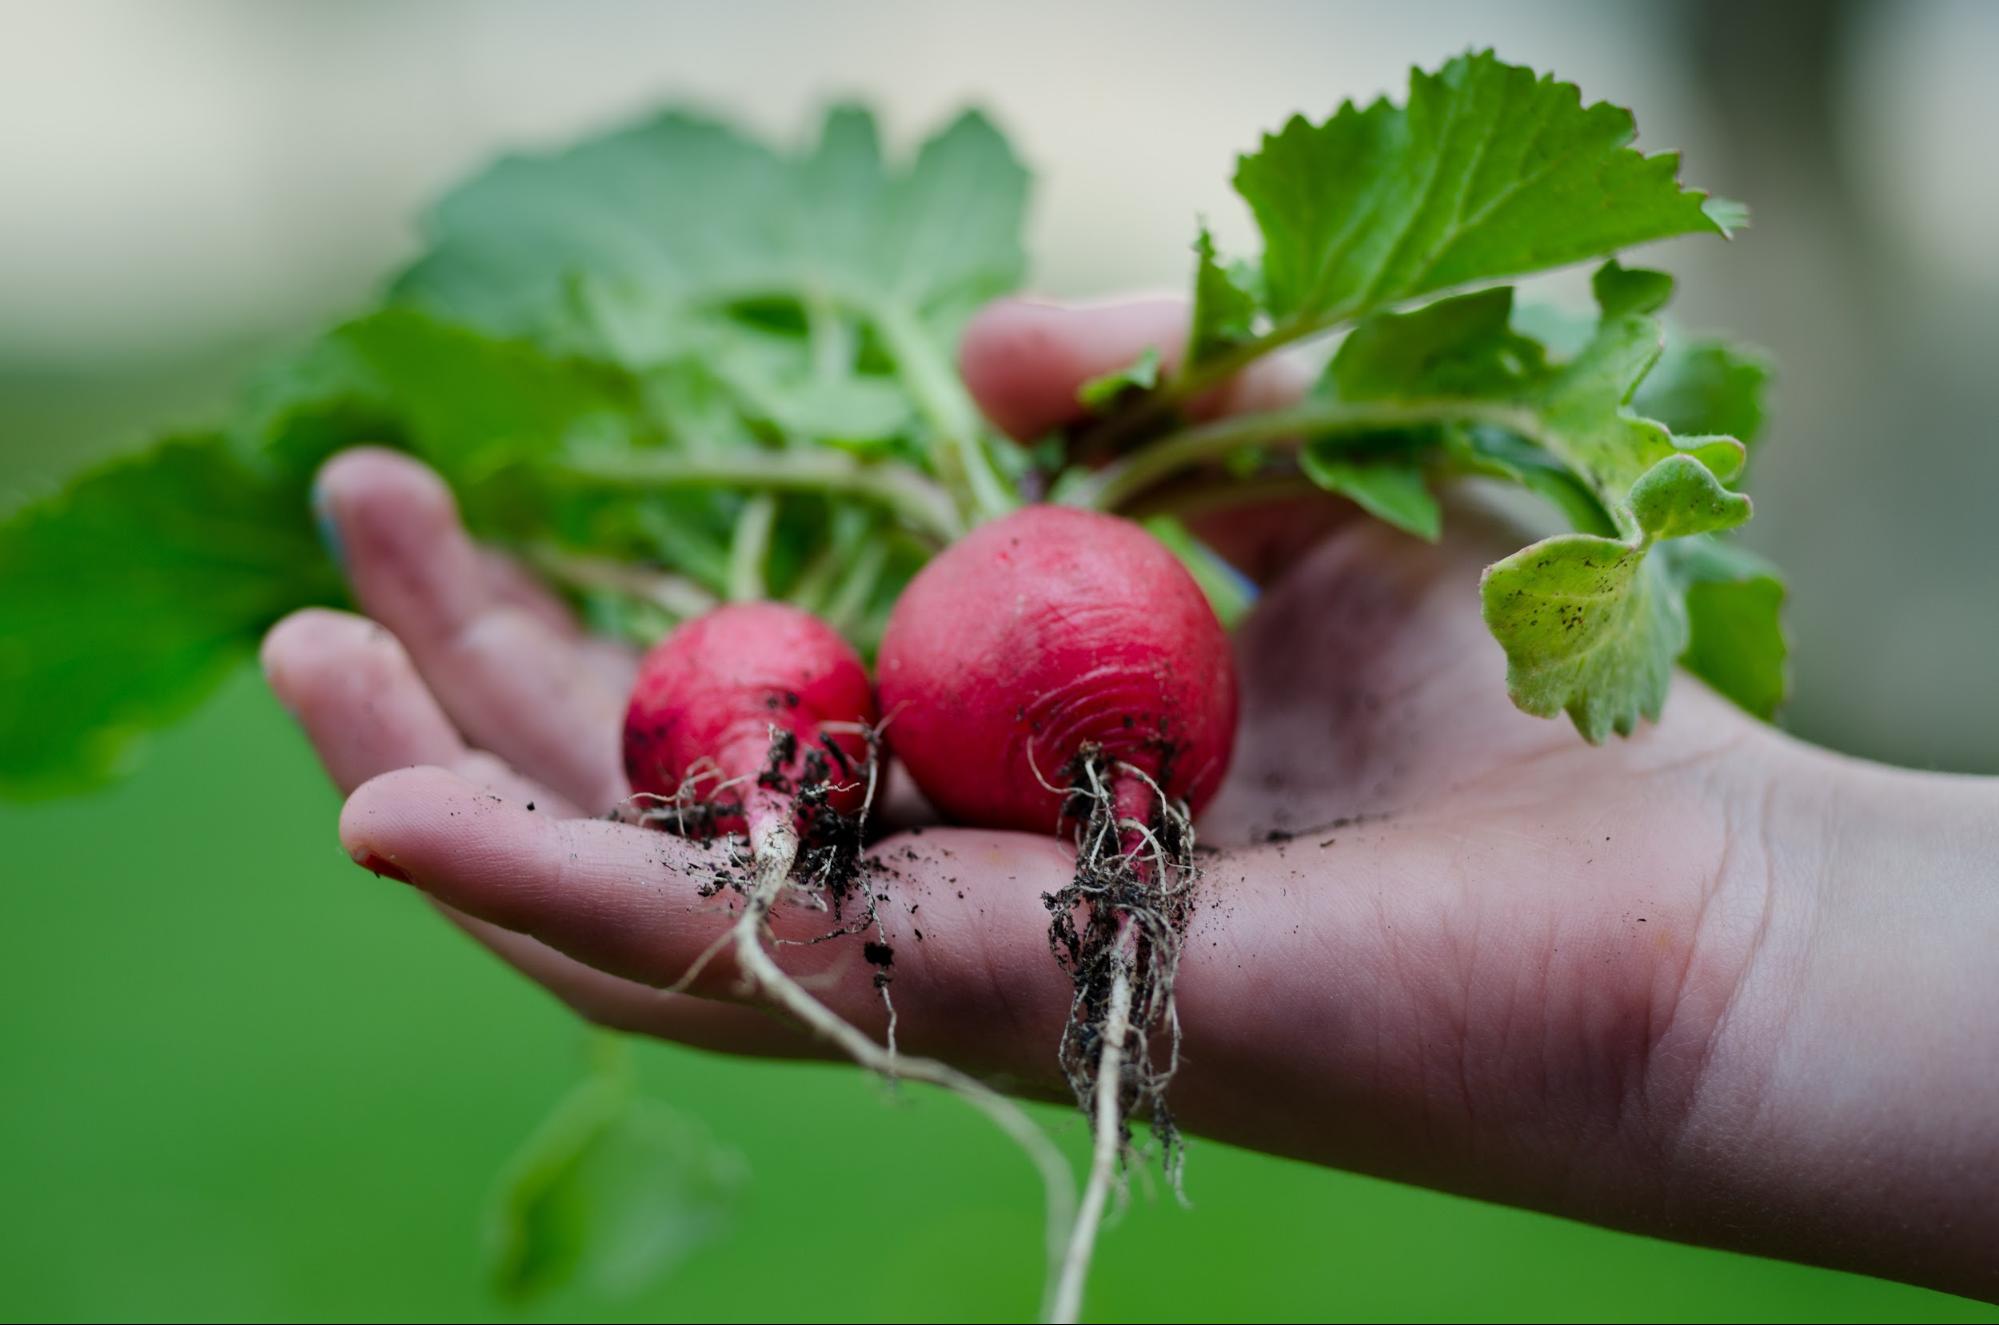 A hand holds two radishes with soil-covered roots that have just beenharvested